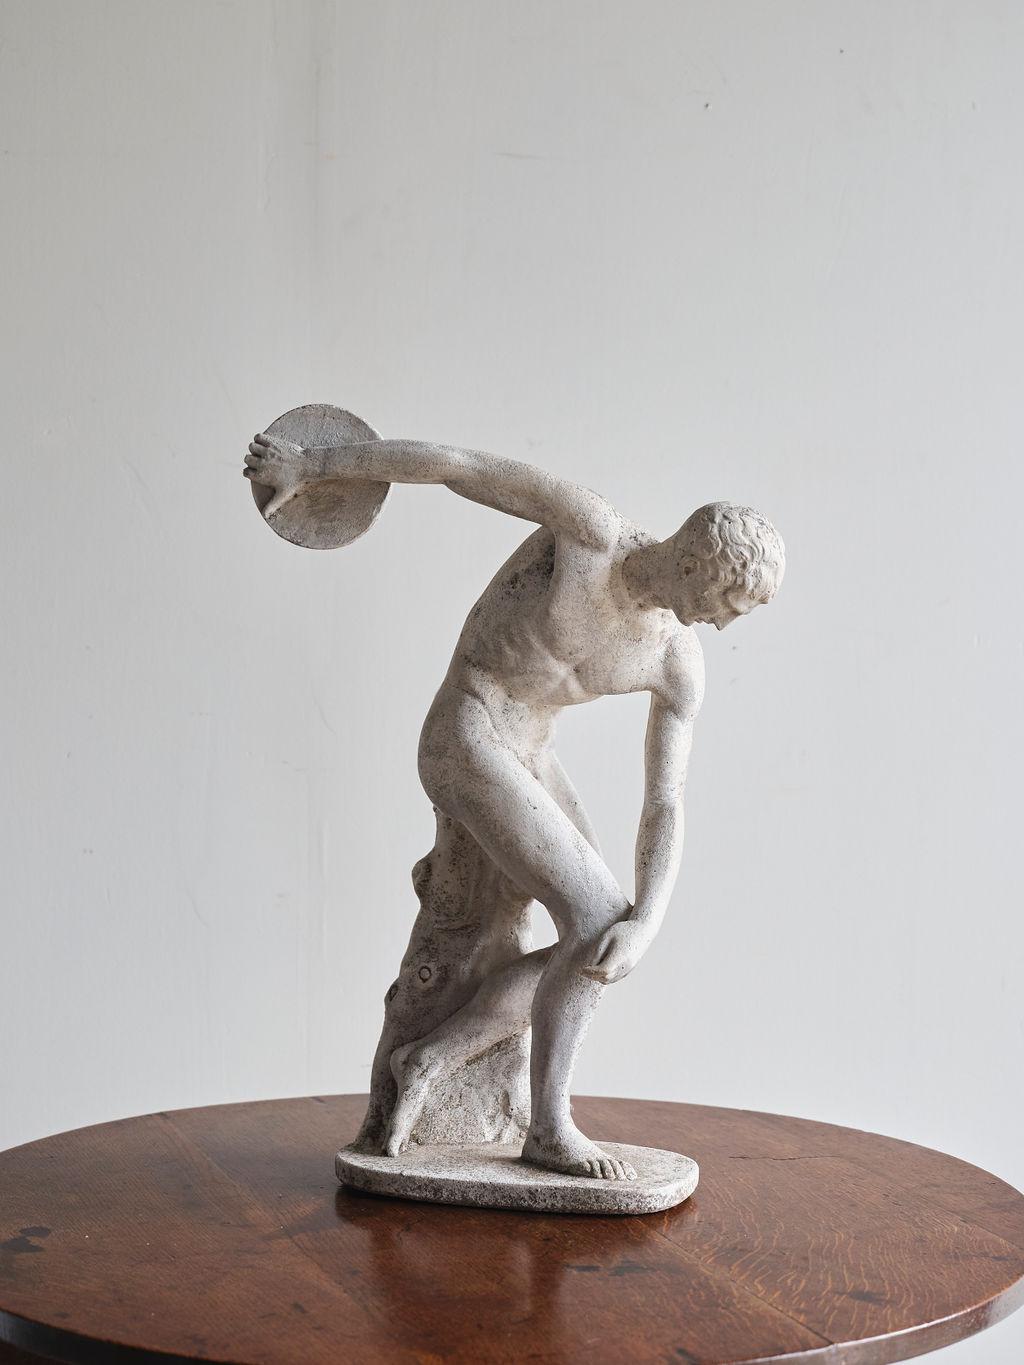 This early 20th century Italian classical composite figure of Discobulus would be a wonderful statement piece in your home of office. It is heavy and was handcrafted out of stone in 1920. This piece is in great condition, and there are no visible